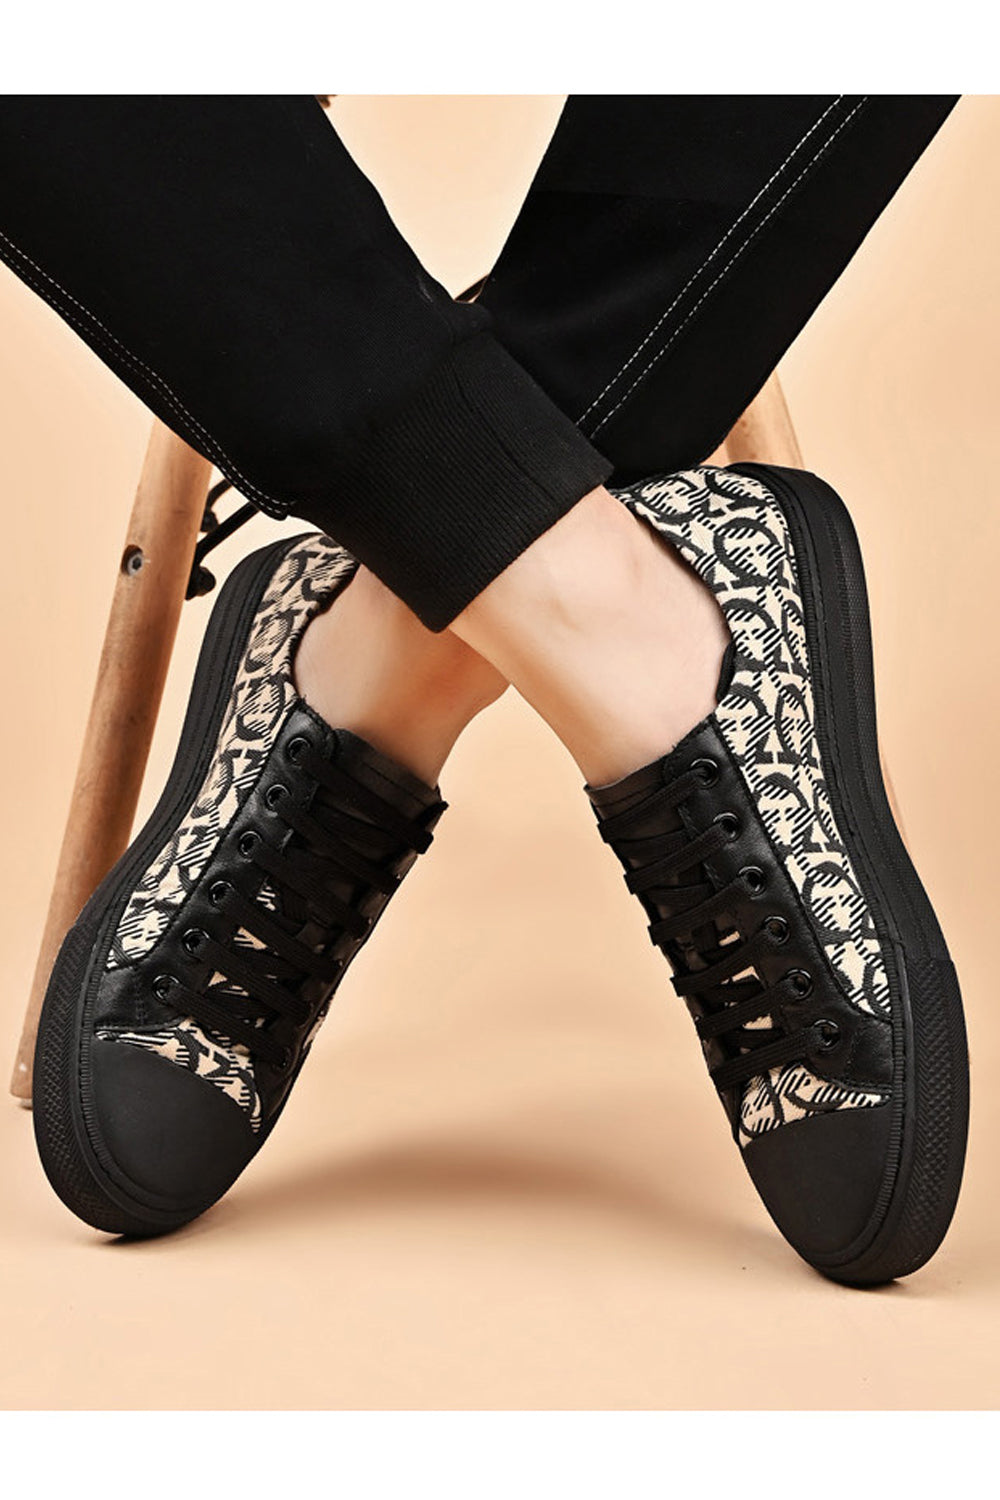 Men Comfortable Inner Collar Flat Rubber Soled Elegent Lattice Pattern Lace Up Casual Sneaker Shoes - MSA105594